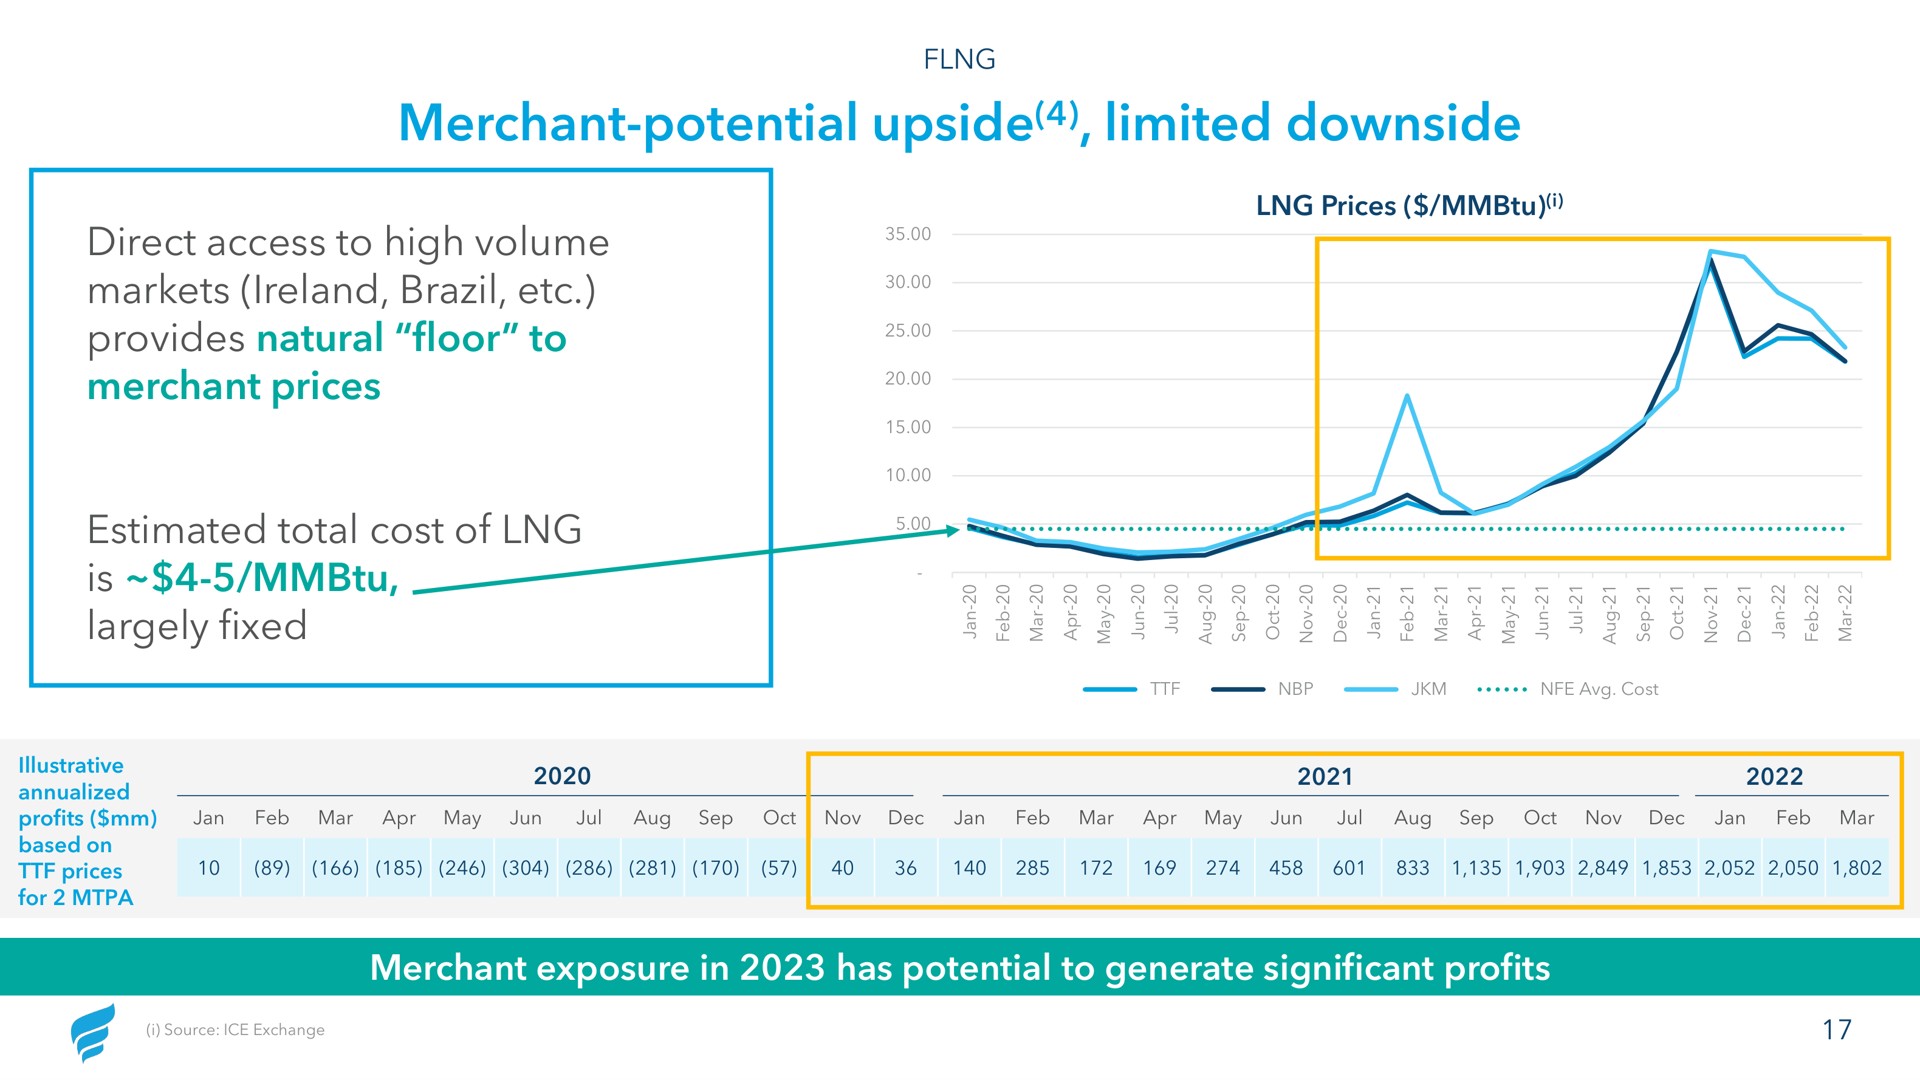 merchant potential upside limited downside direct access to high volume markets brazil provides natural floor to merchant prices estimated total cost of is largely fixed a am | NewFortress Energy